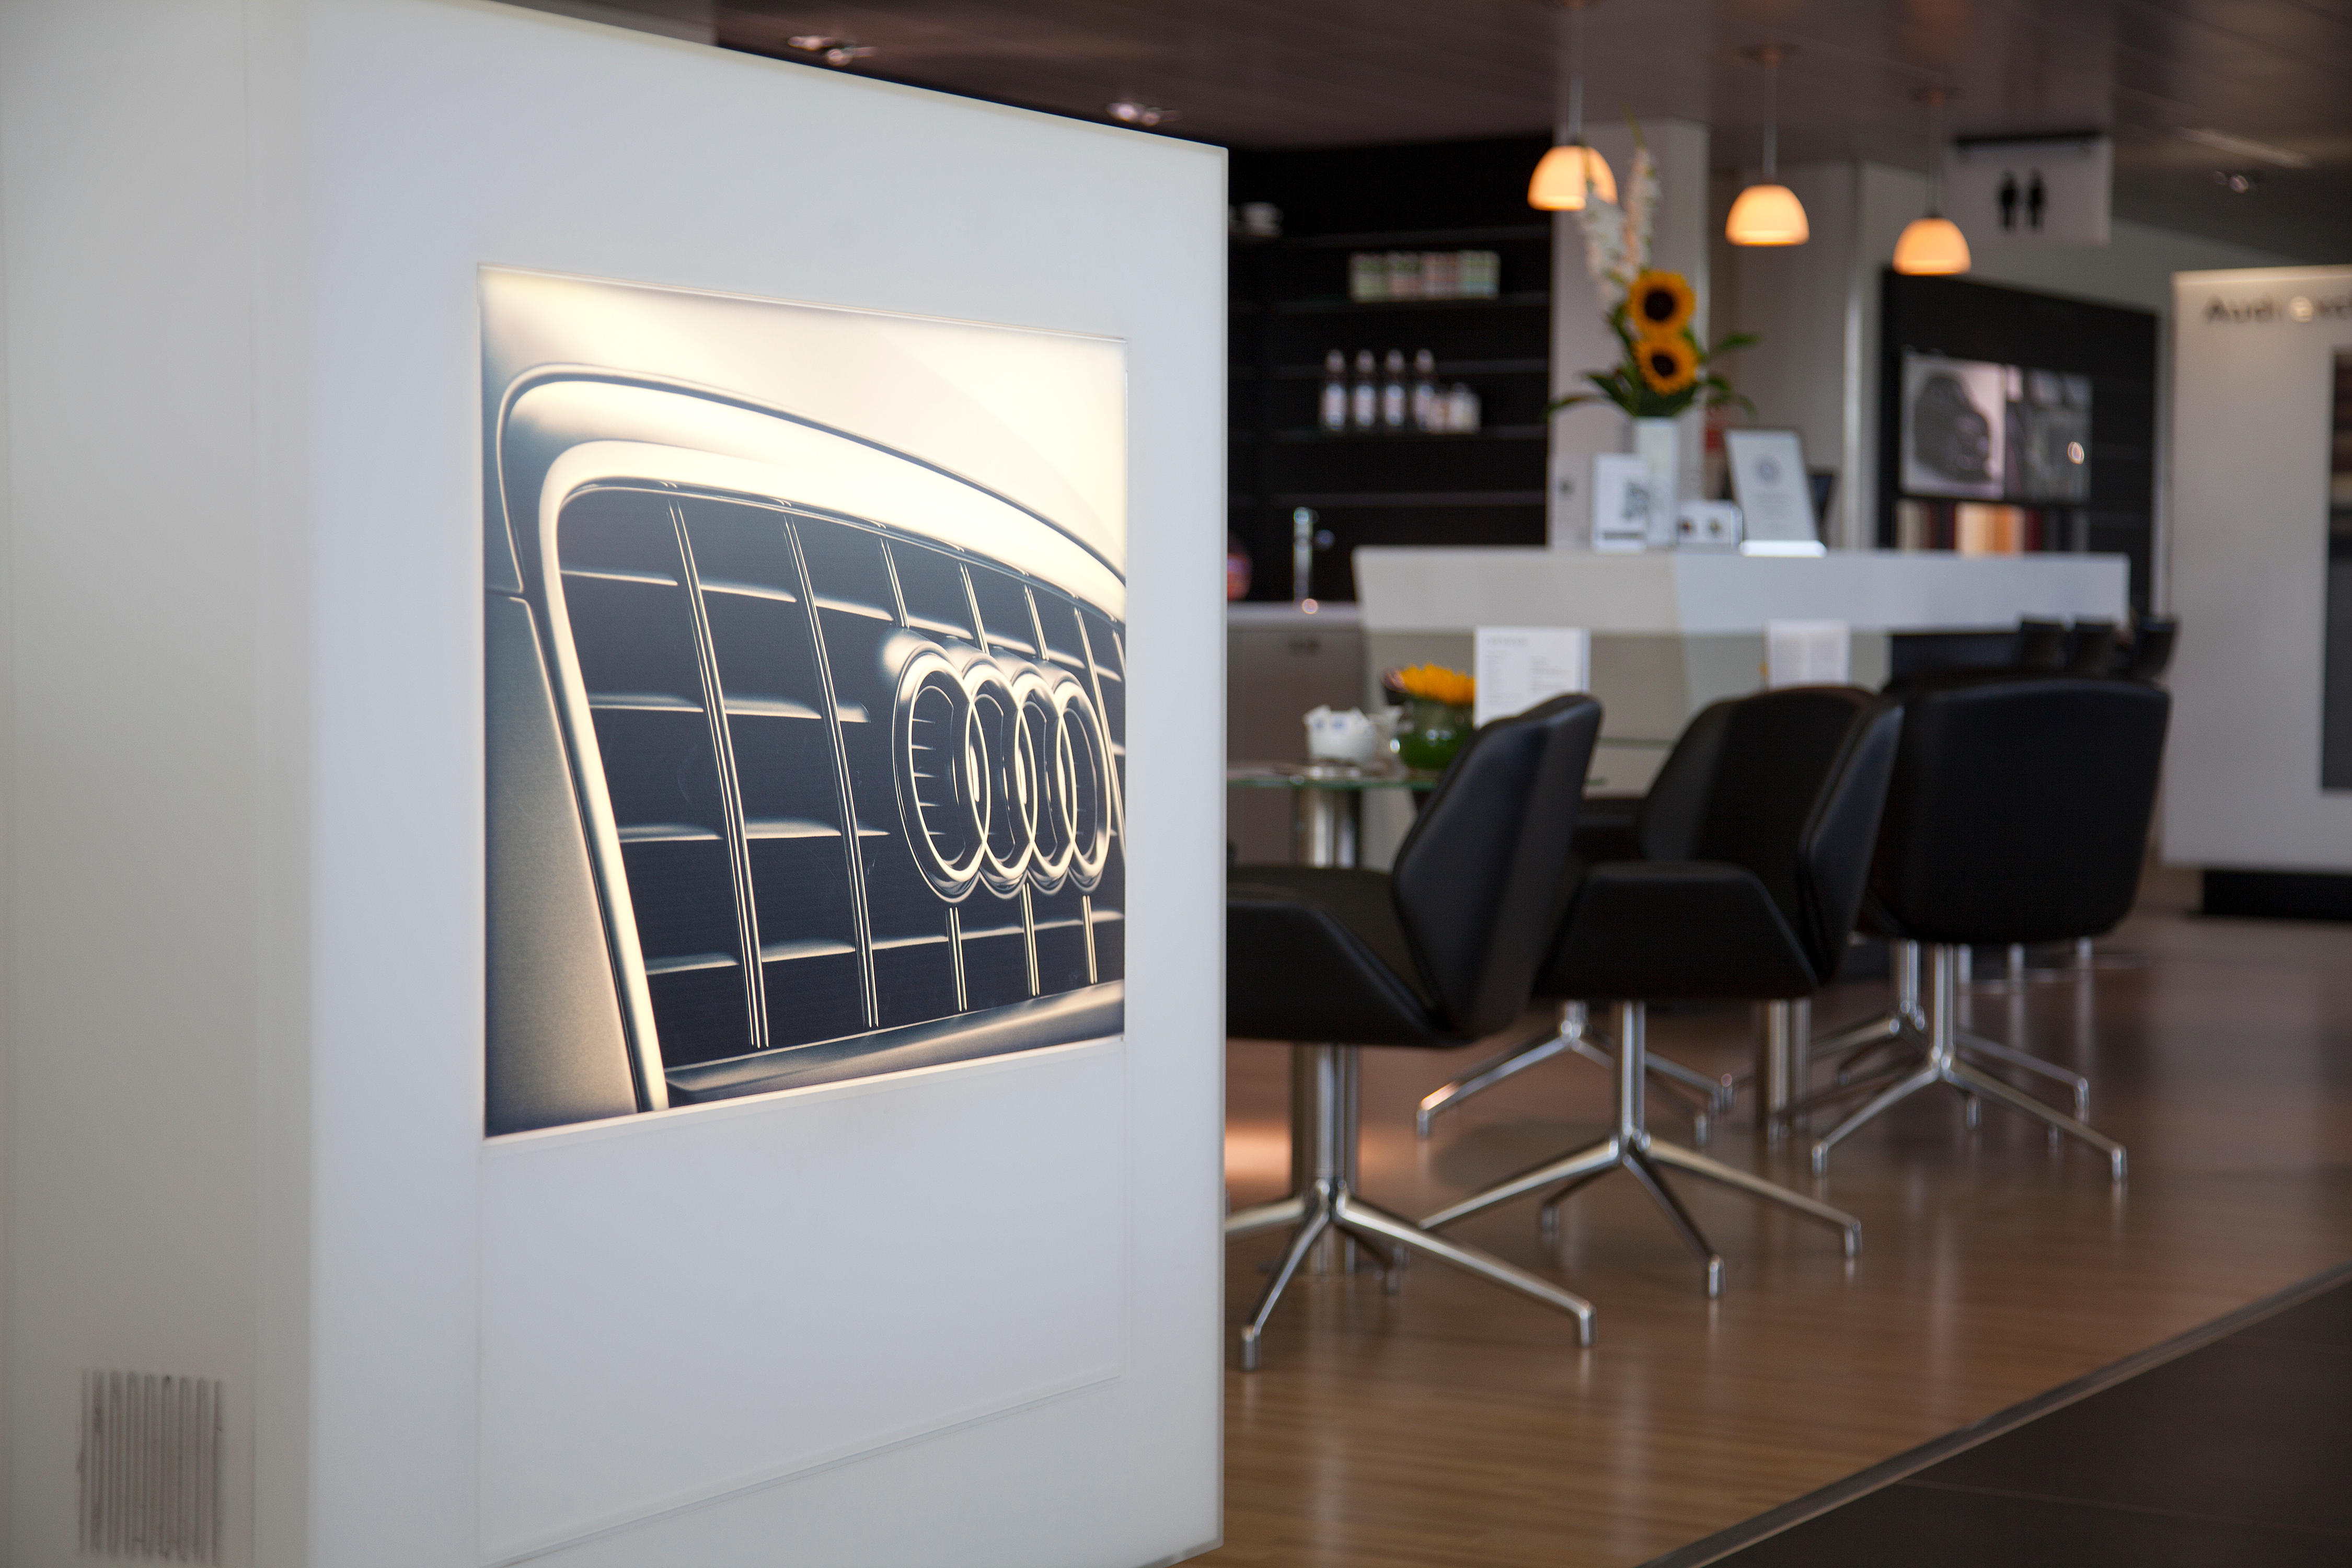 Images Wakefield Audi